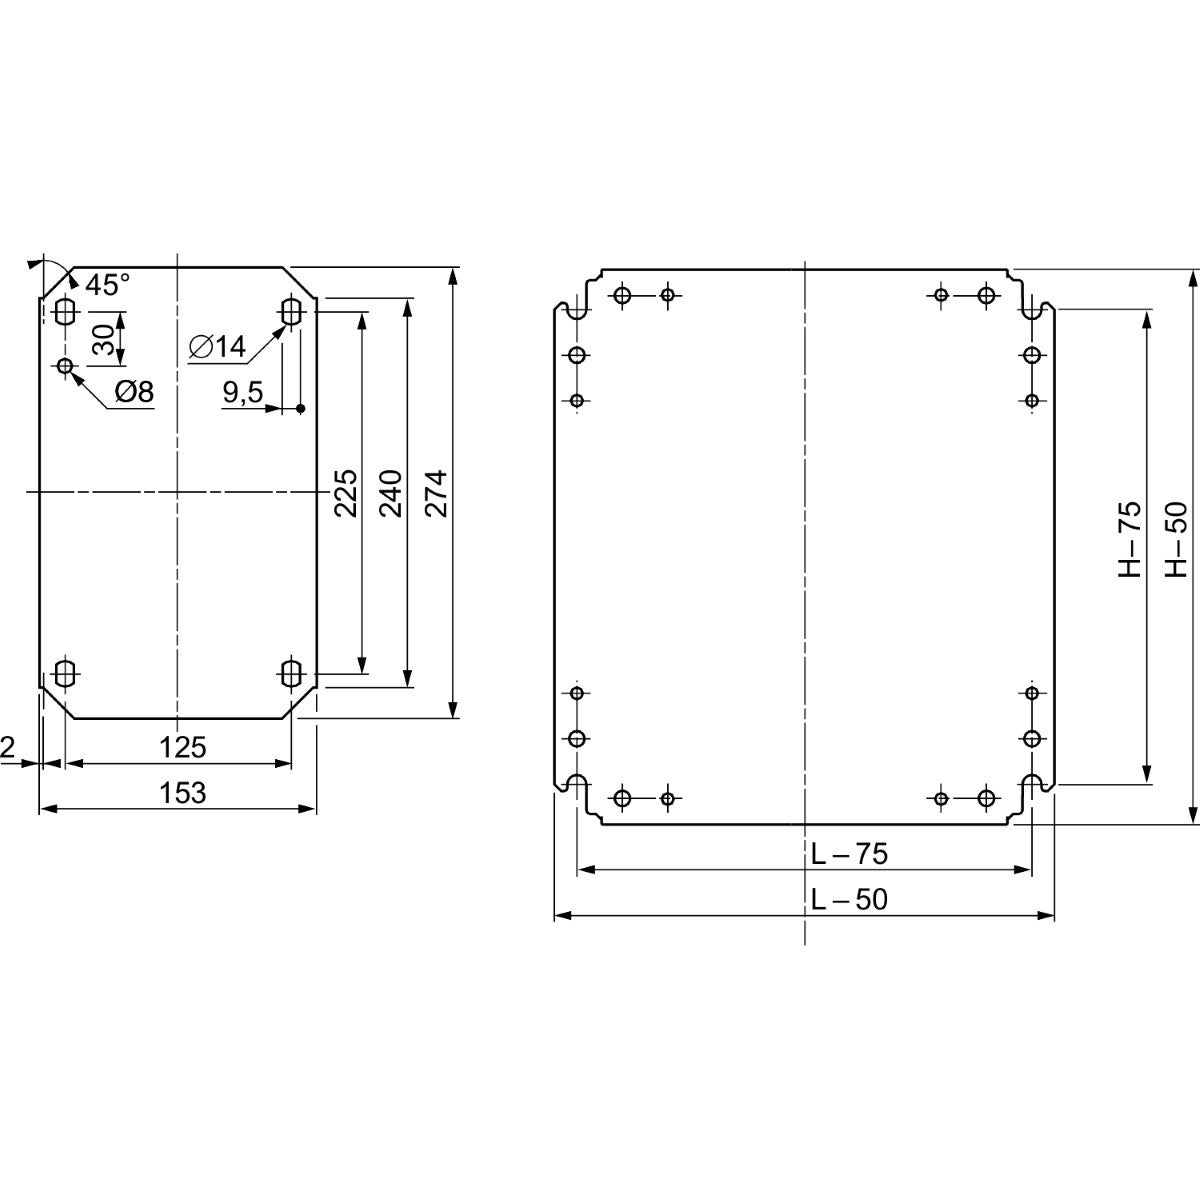 Plain mounting plate H1400xW1000mm made of galvanised sheet steel